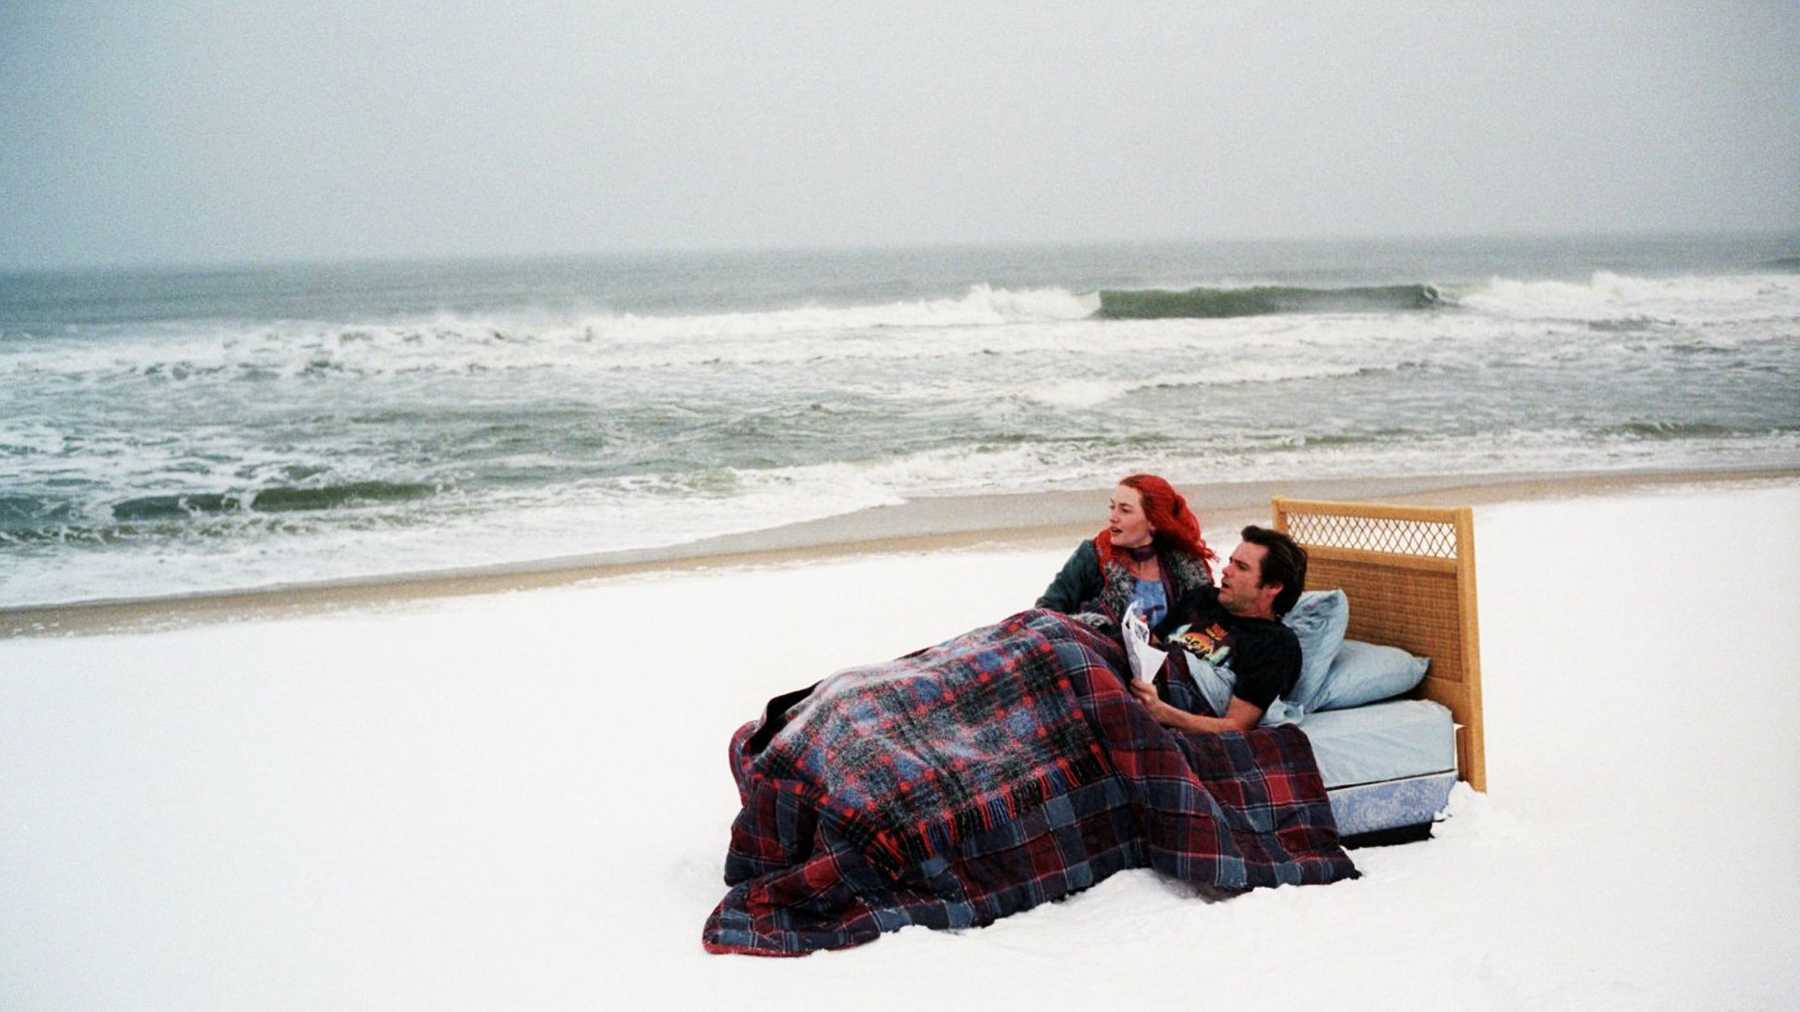 Joel and Clementine wake up in a dream-state in a bed on a beach.